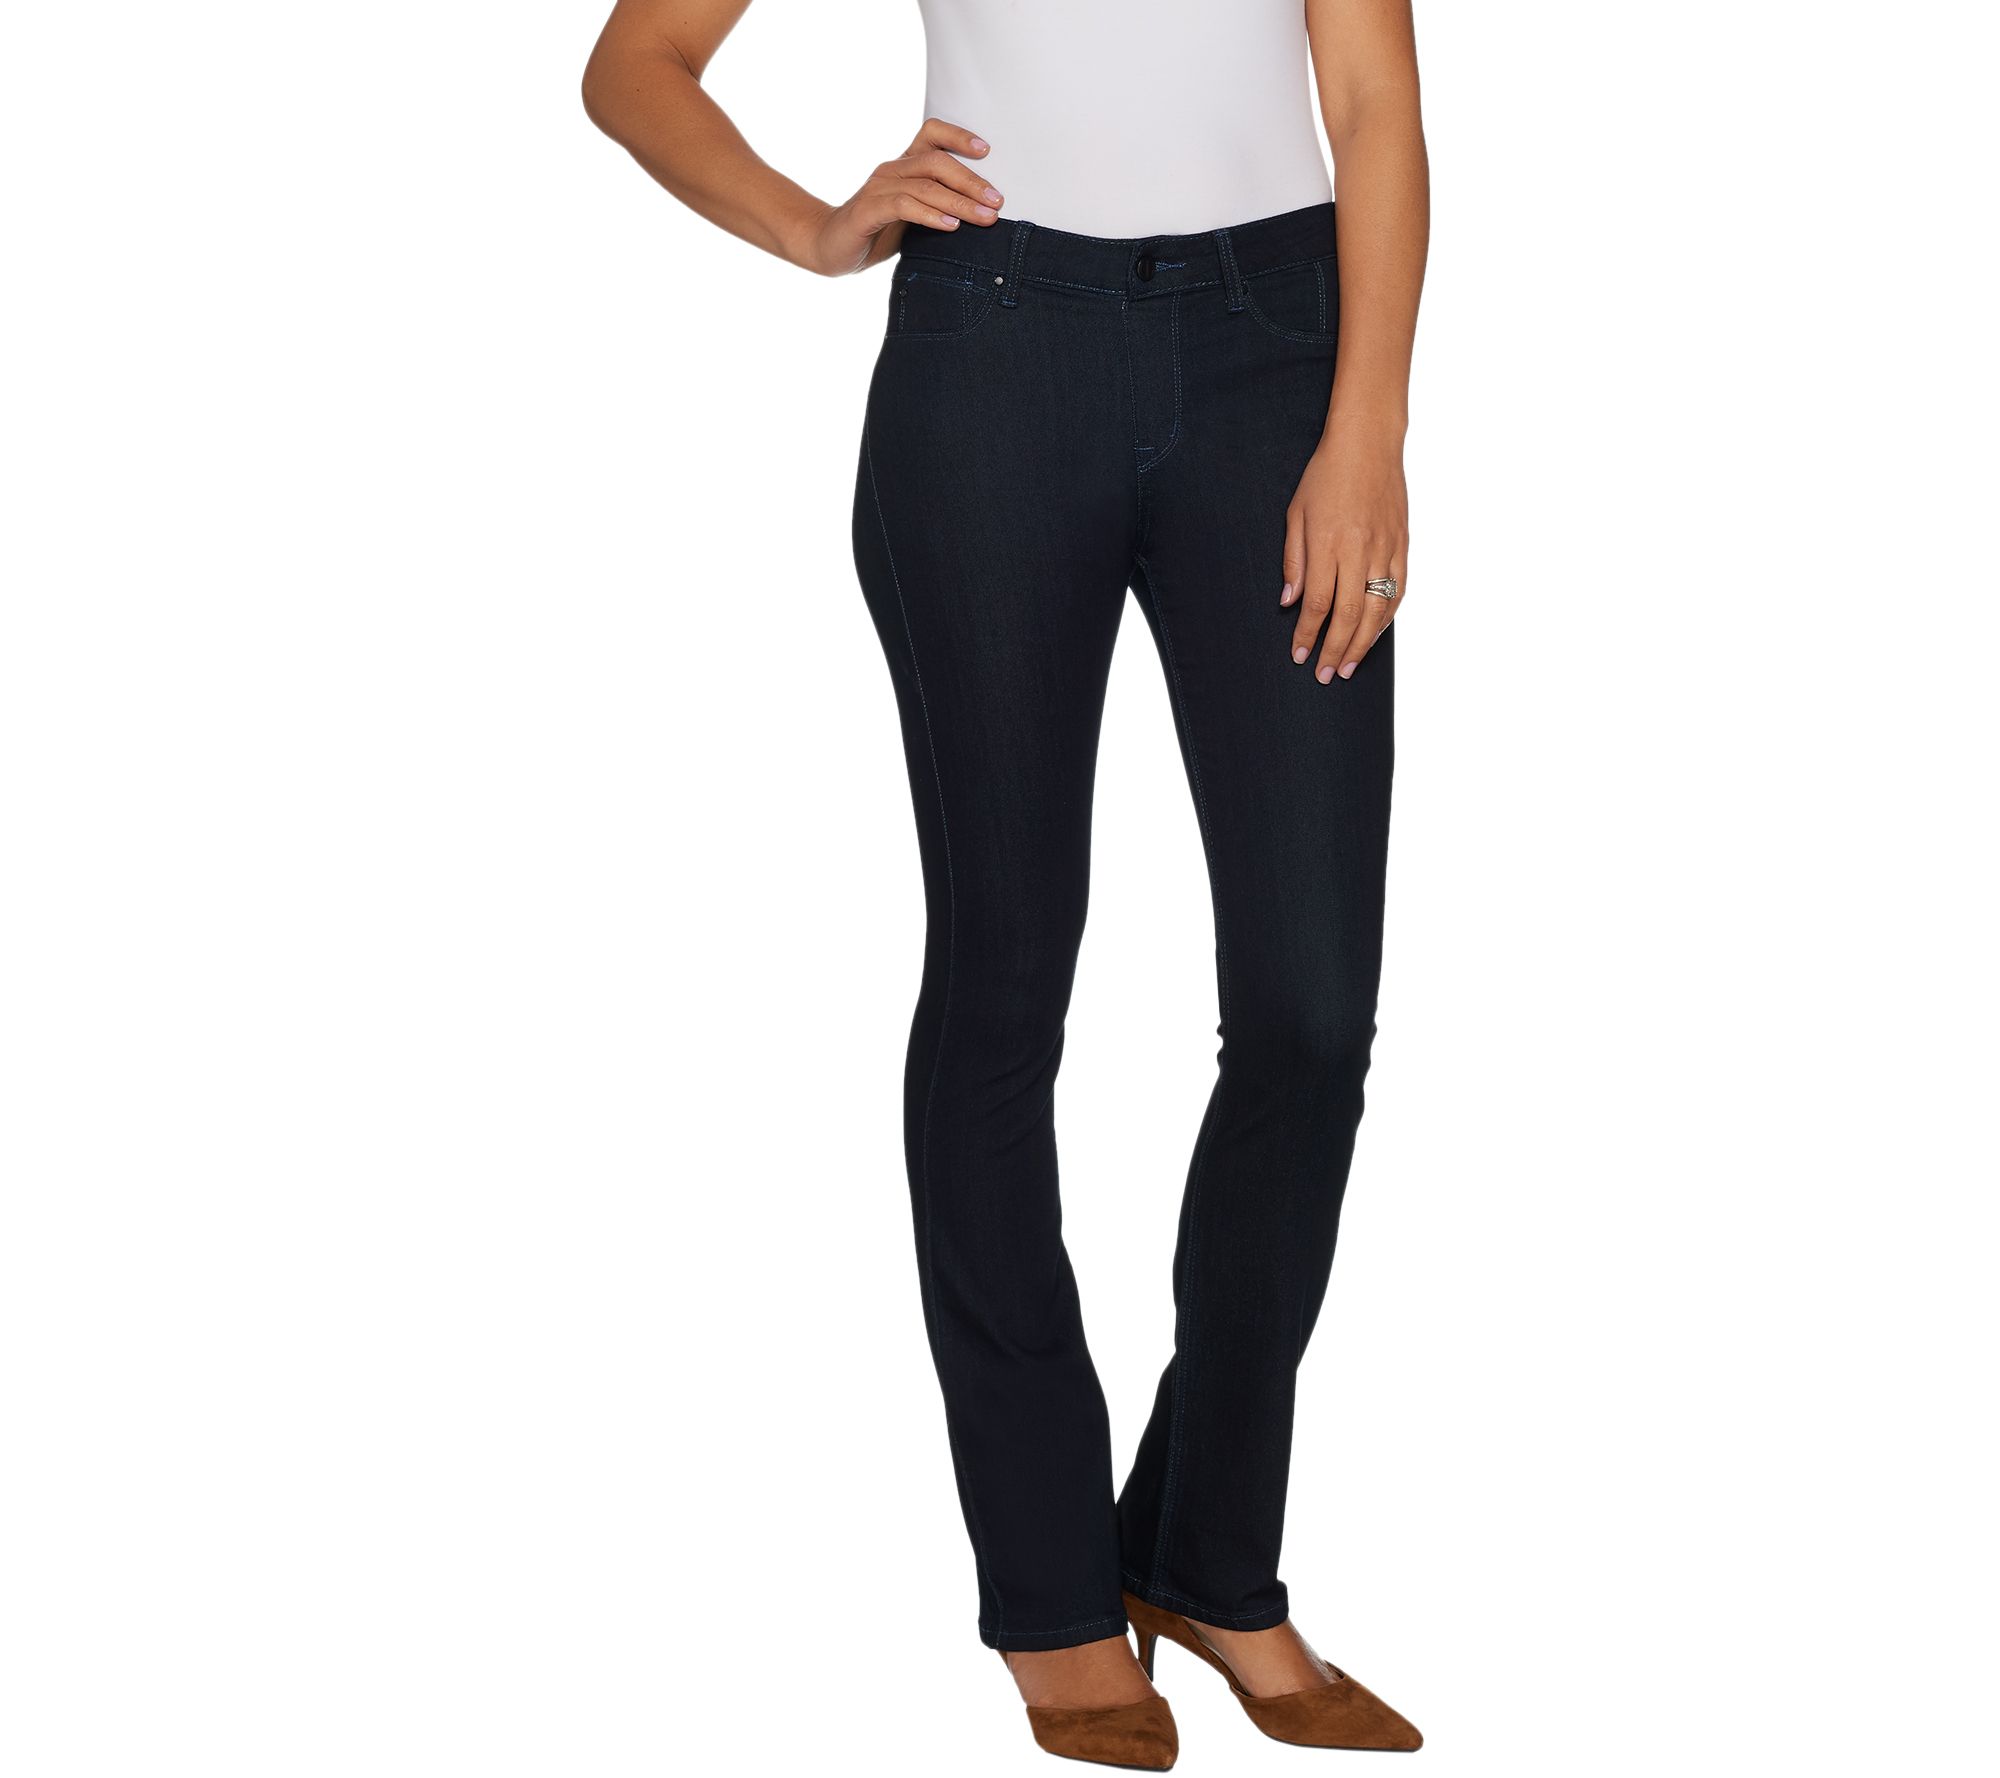 Laurie Felt Regular Silky Denim Baby Bell Pull-On Jeans - Page 1 — QVC.com